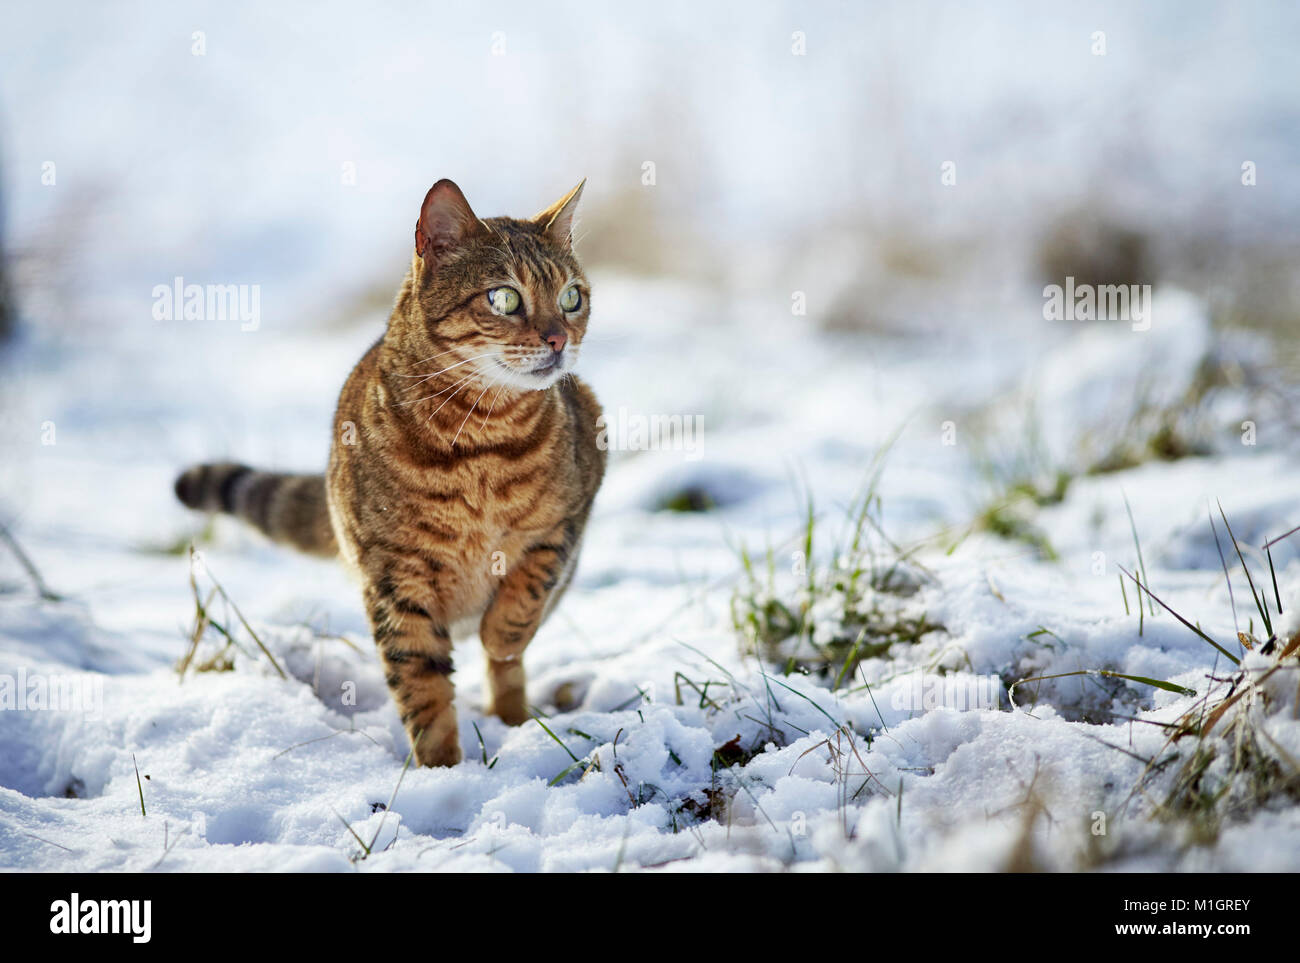 Bengal cat. Adult standing on snow. Germany Stock Photo